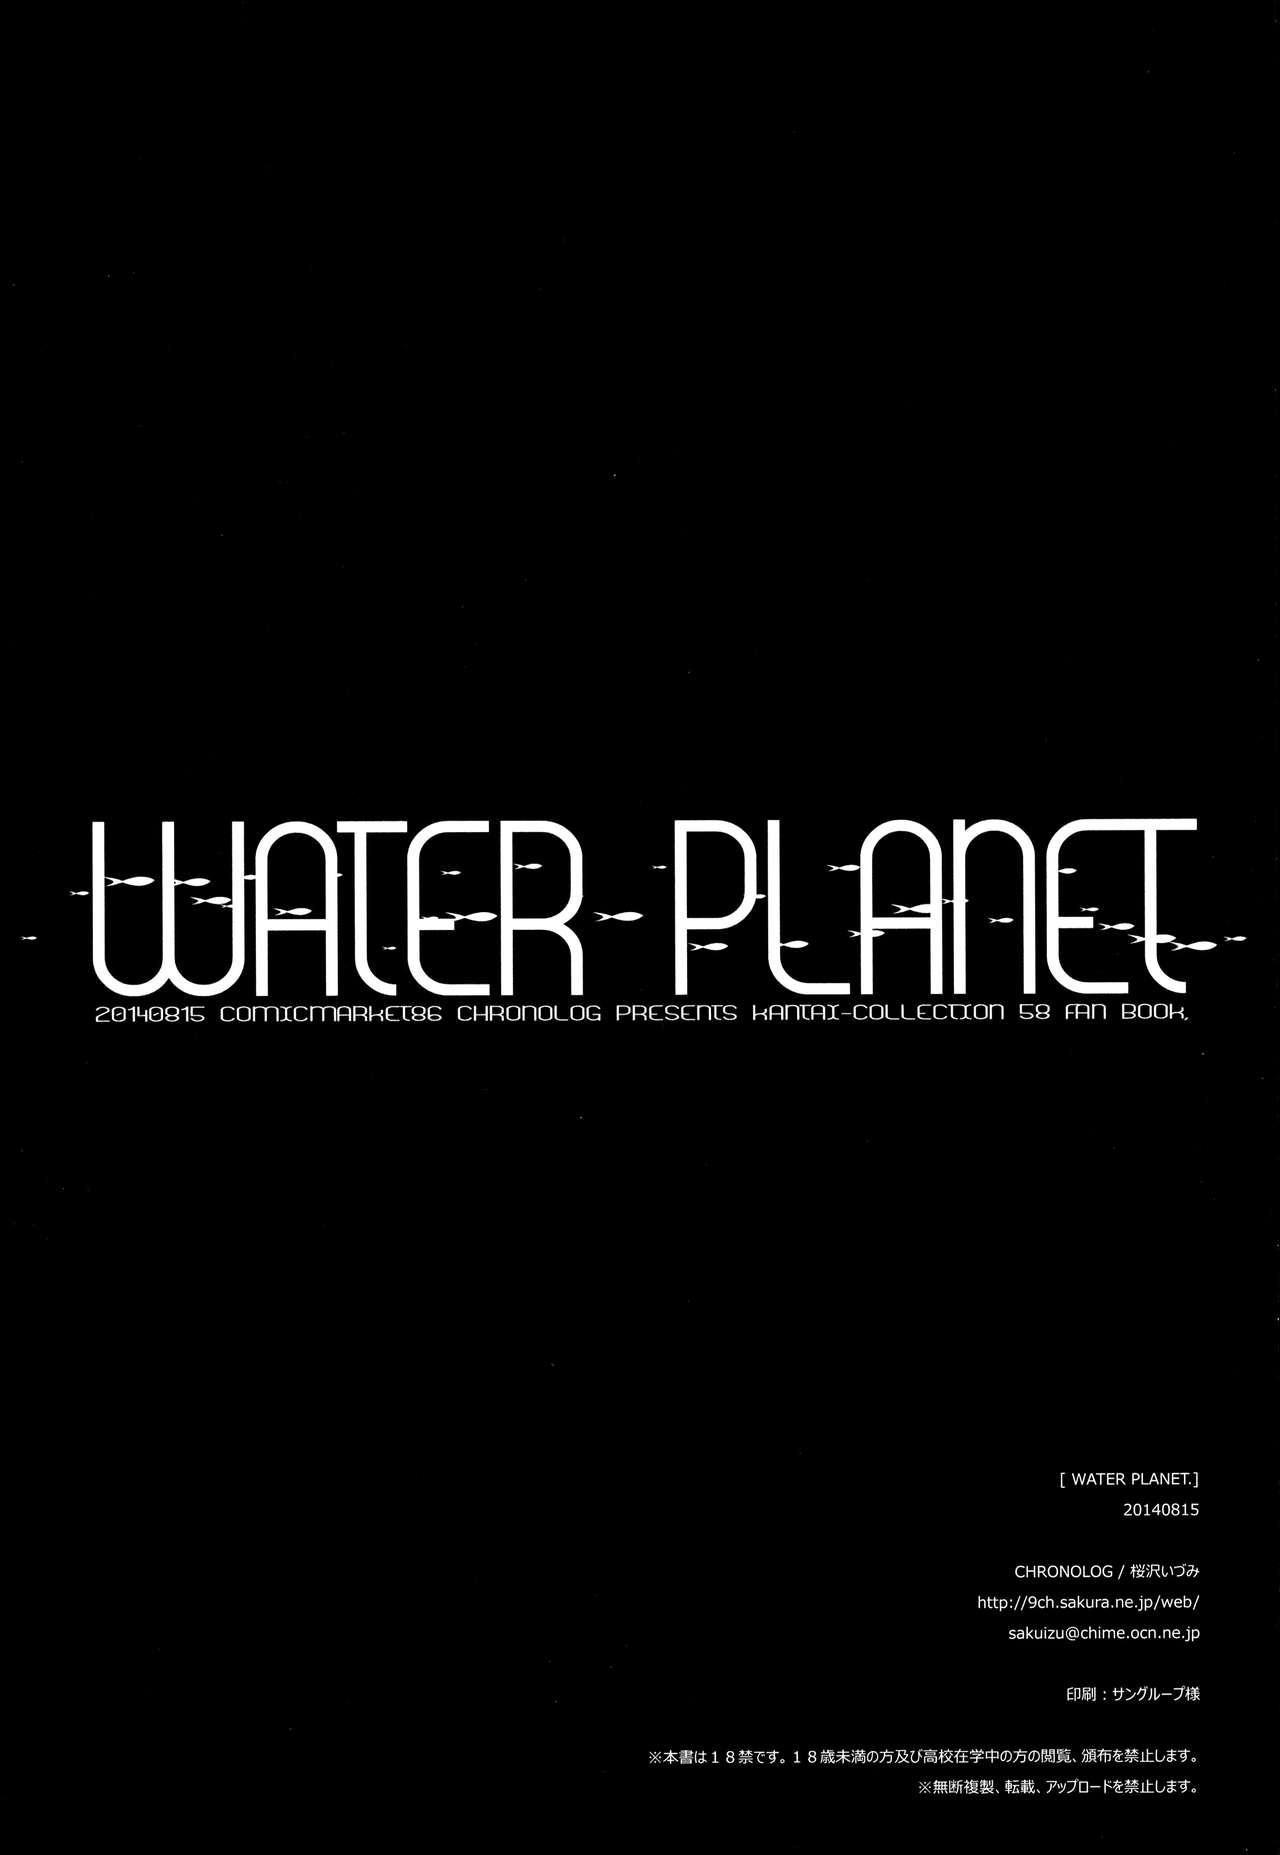 WATER PLANET. 25